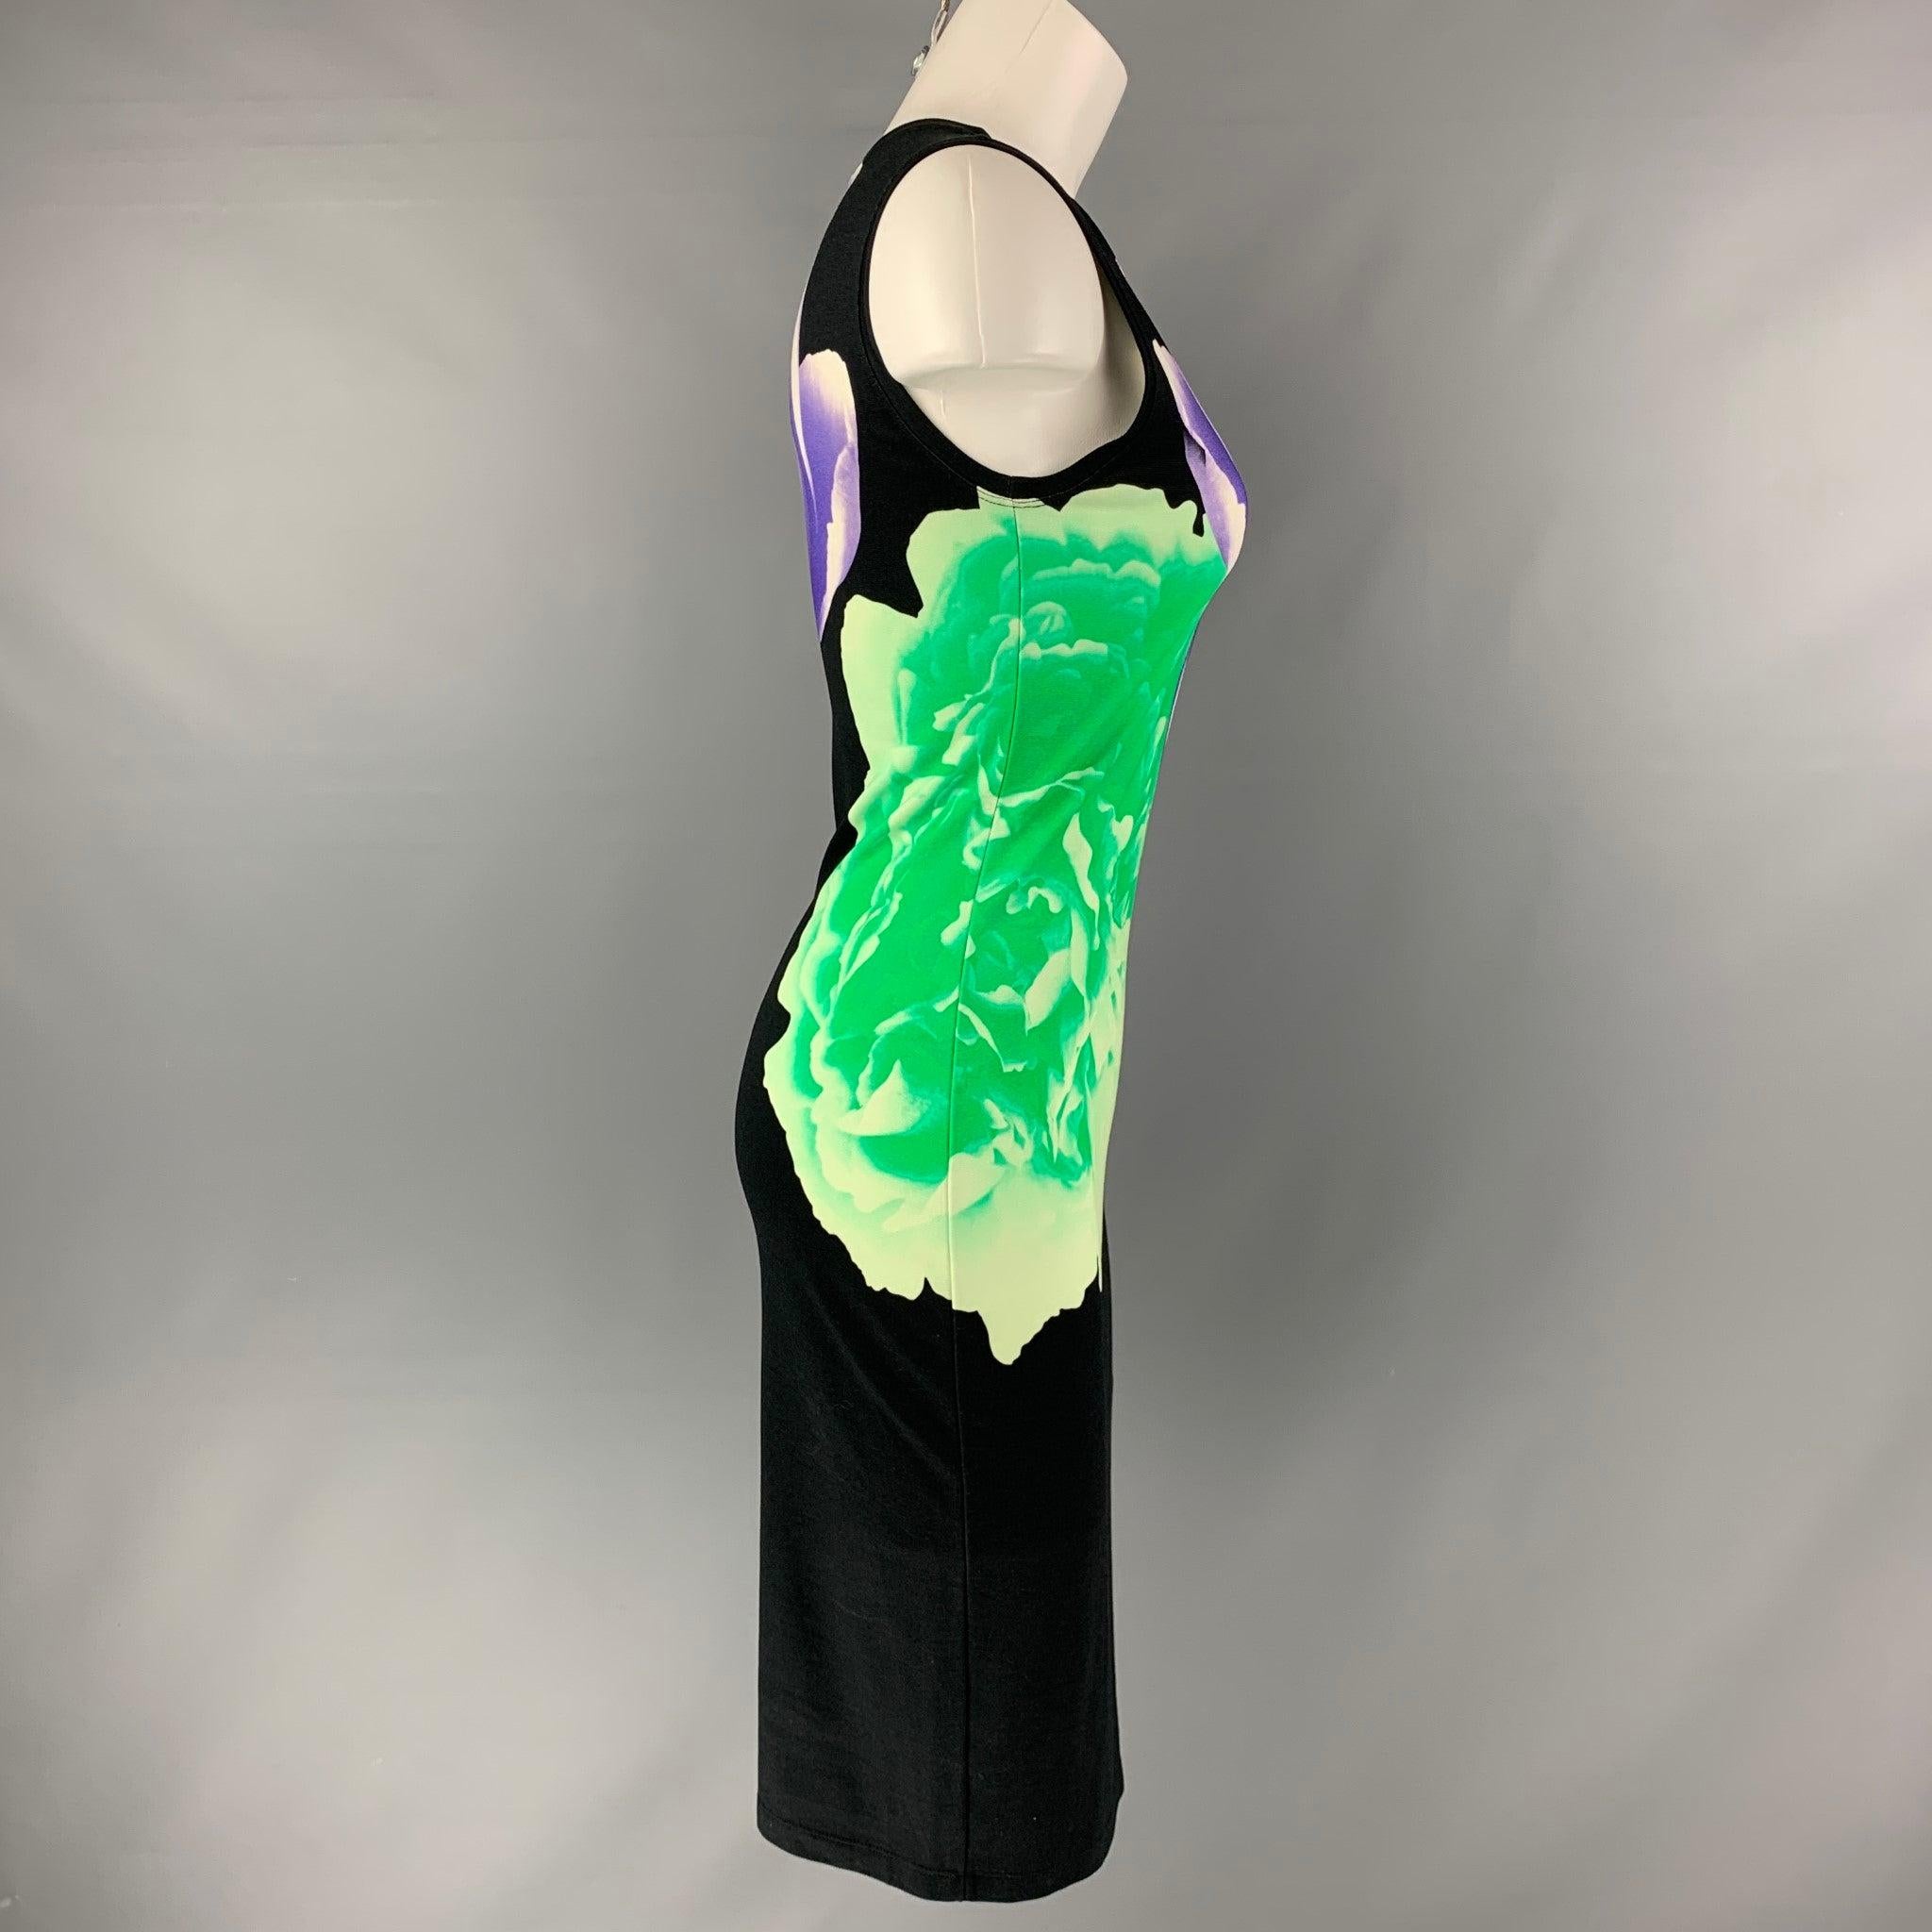 JONATHAN SAUNDERS sleeveless, bodycon and below knee dress comes in black, green and purple floral printed viscose and elastane knitted fabric. Made in Italy.Excellent Pre-Owned Conditions.  

Marked:   S 

Measurements: 
 
Shoulder: 13.5 inches